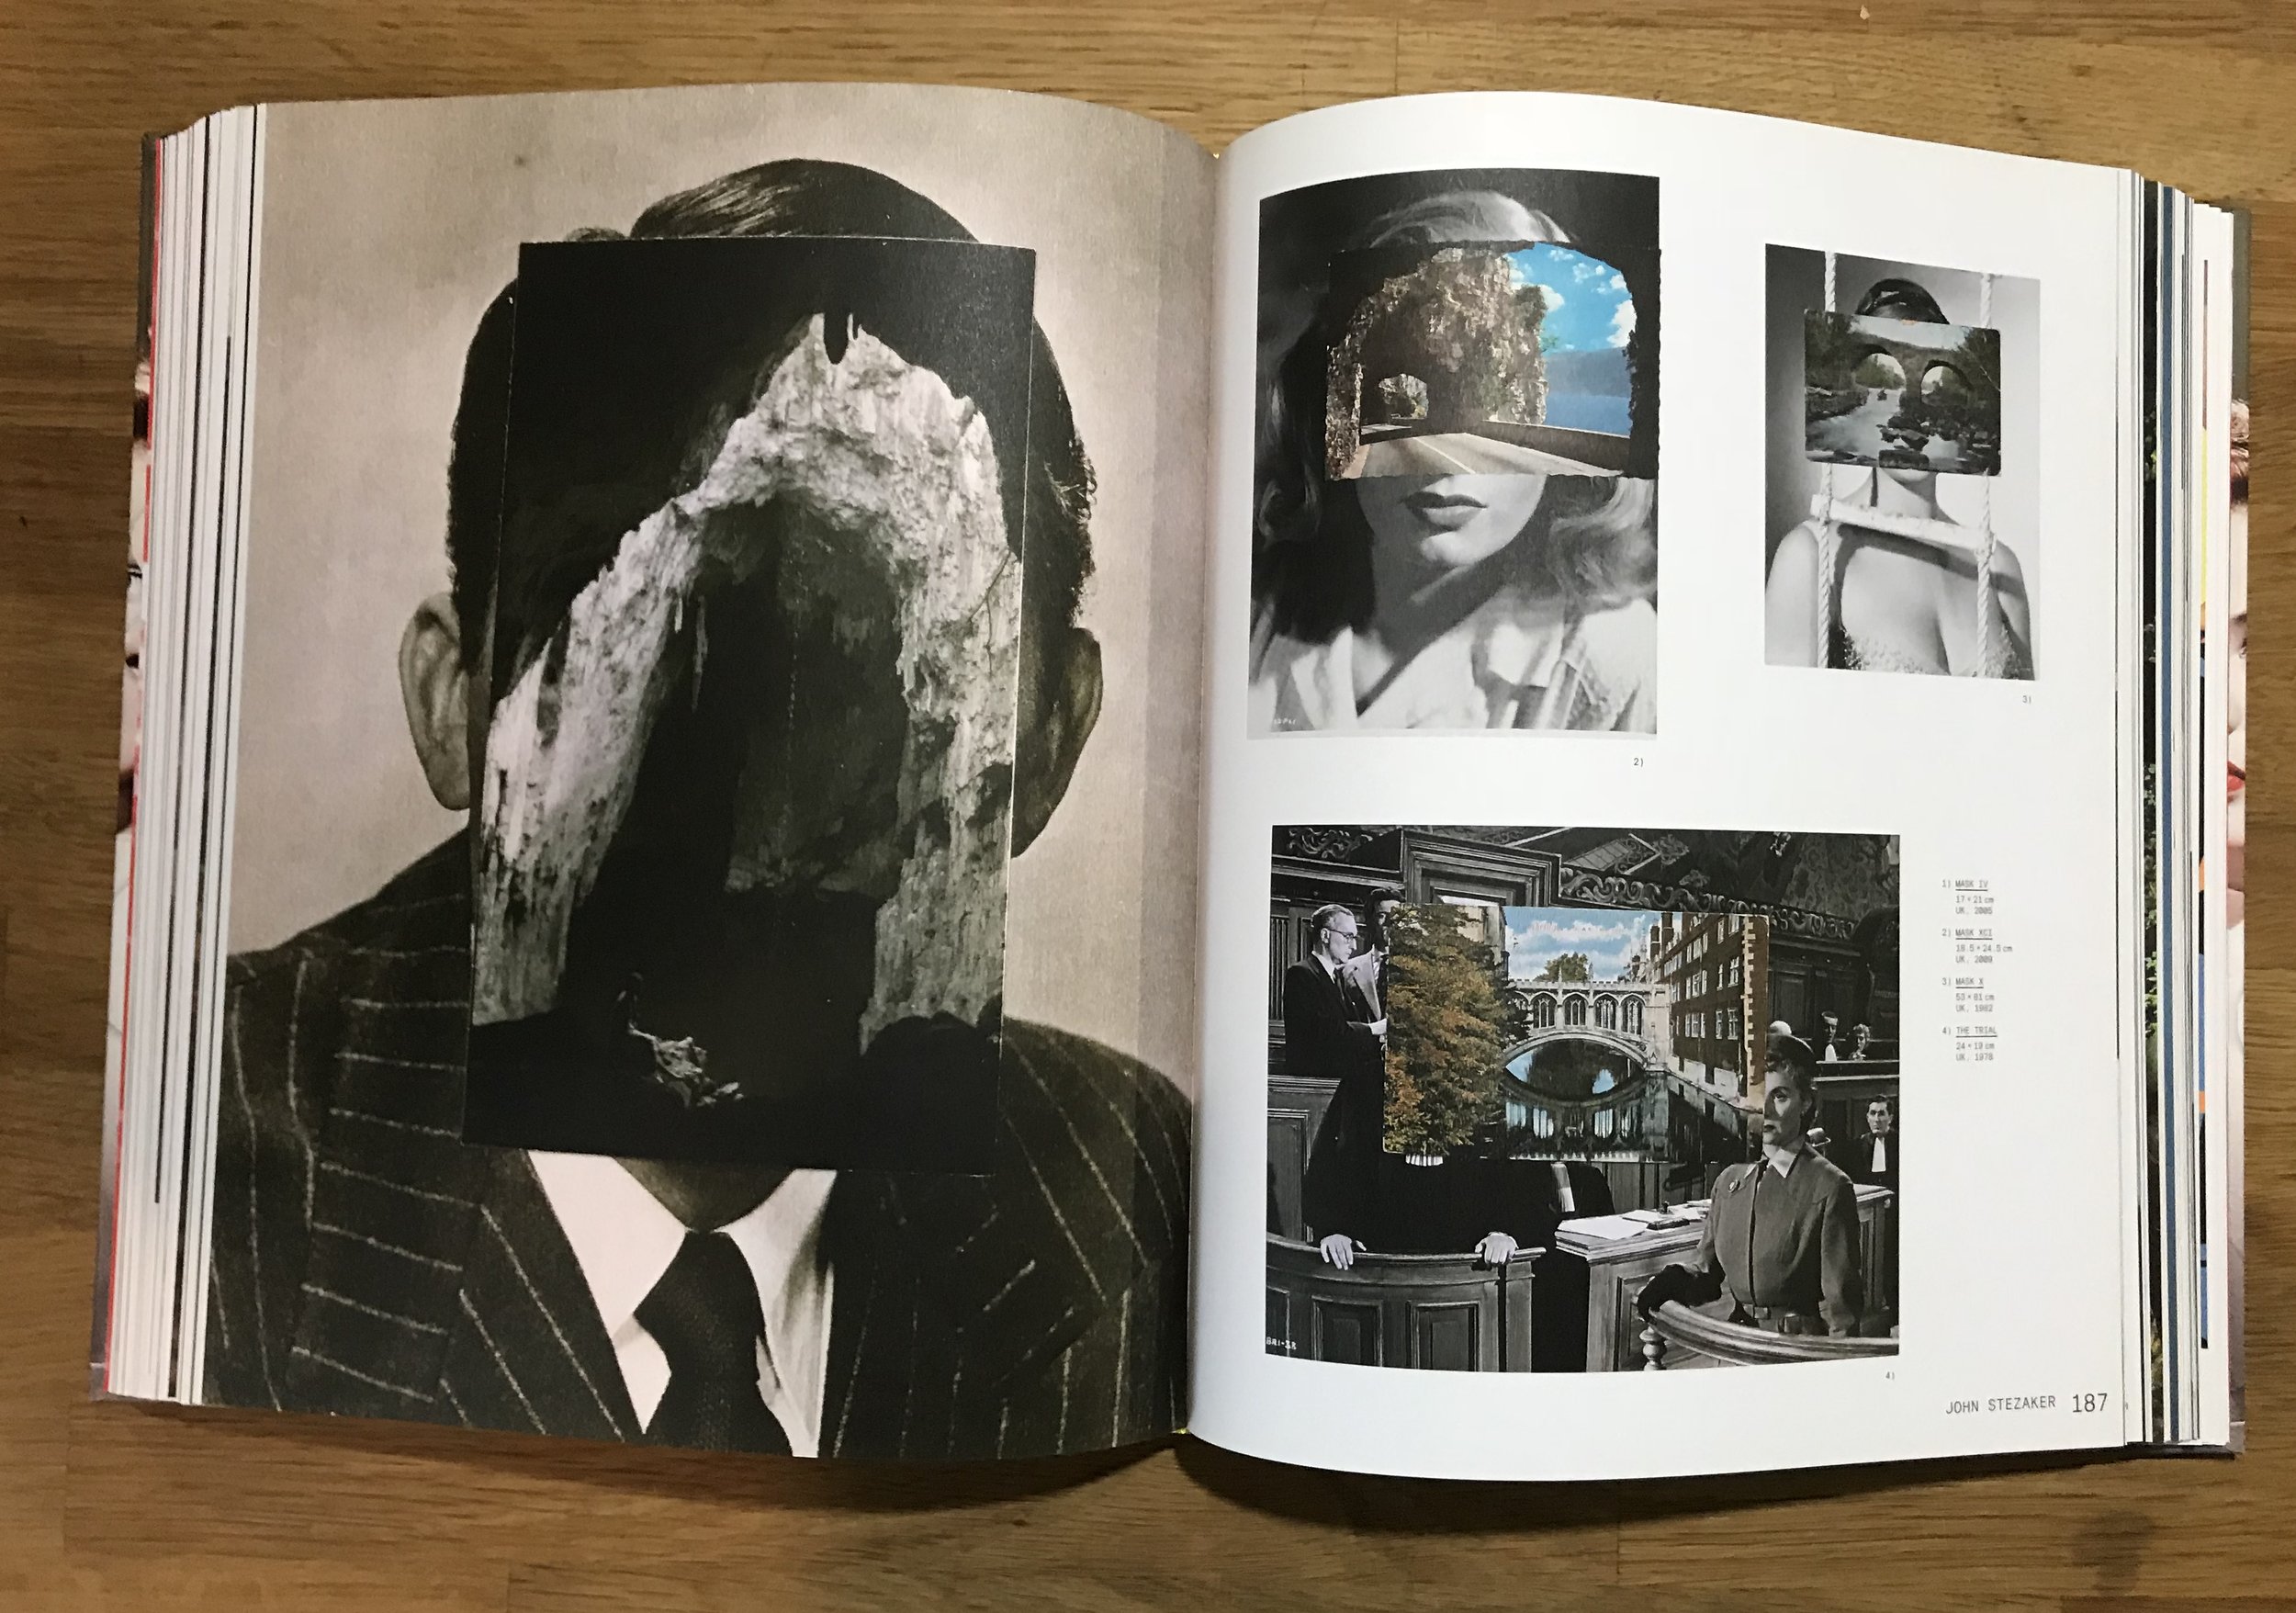 Books about Contemporary Collage — stephen knezovich